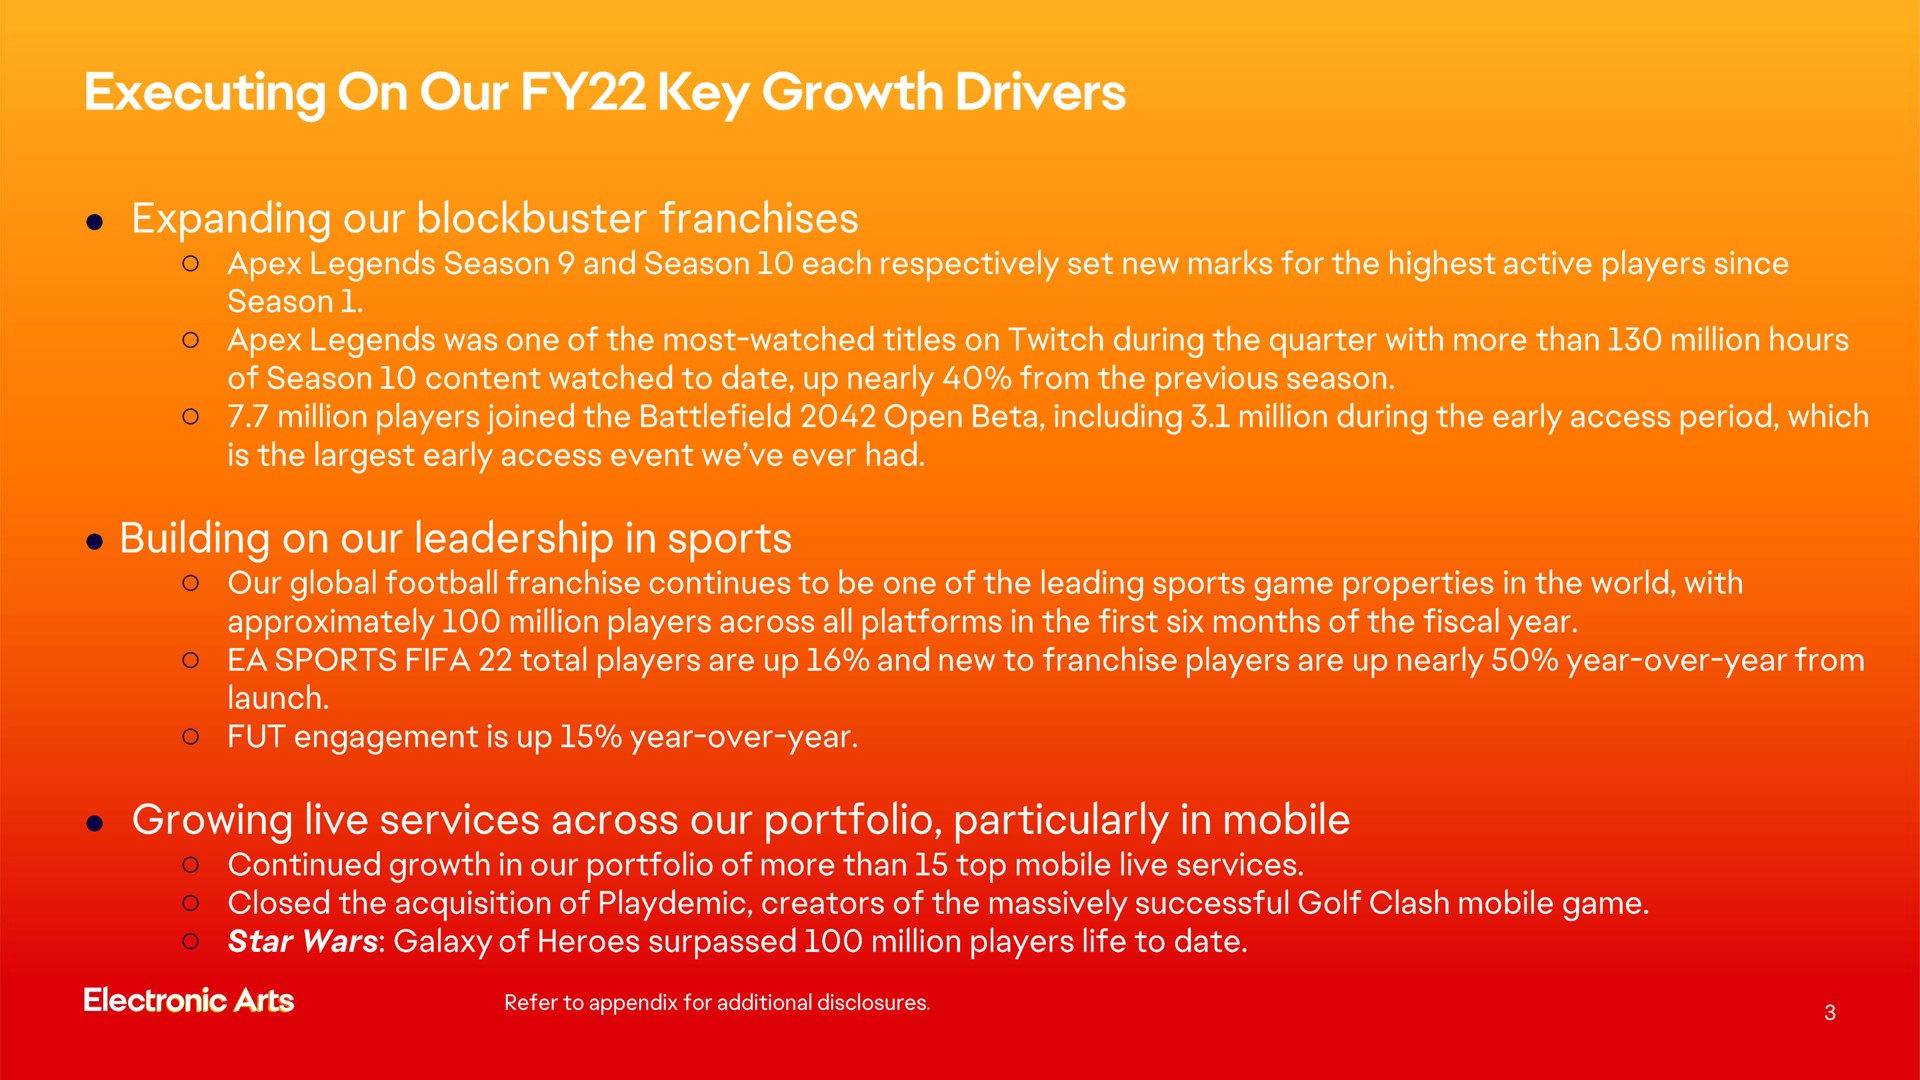 star wars across perit ton sports total players are up and new to franchise players are up year over year from launch continued growth in our portfolio of more than top mobile live services closed the acquisition of creators of the massively successful golf clash mobile game galaxy of heroes surpassed million players life to date growing live services across our portfolio particularly in mobile | Electronic Arts